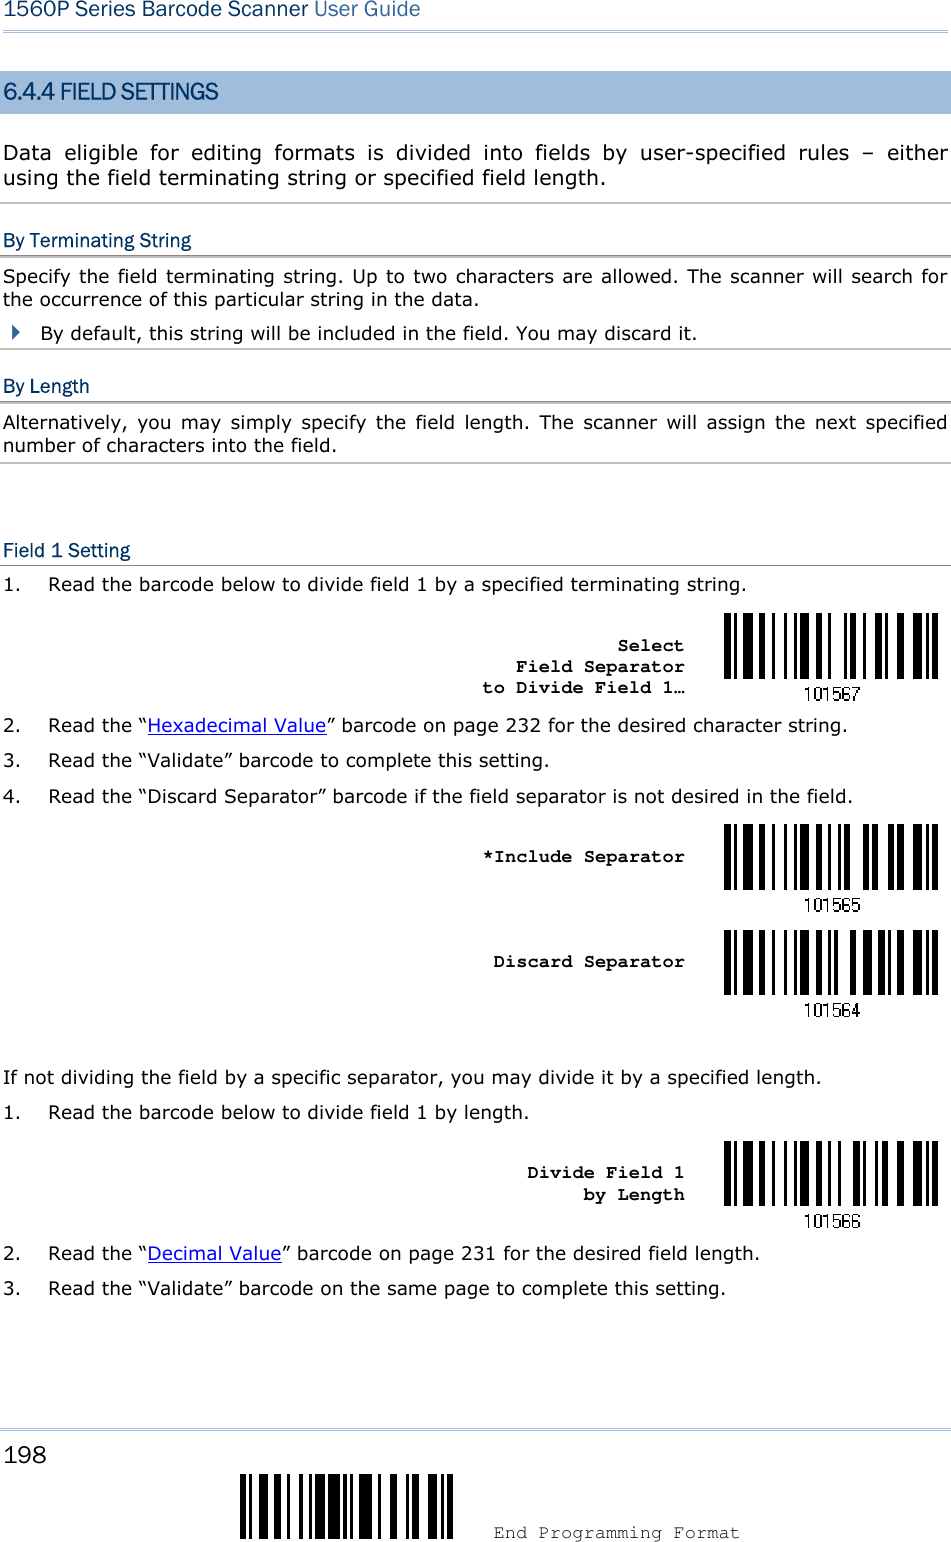 198  End Programming Format 1560P Series Barcode Scanner User Guide 6.4.4 FIELD SETTINGS Data  eligible  for  editing  formats  is  divided  into  fields  by  user-specified  rules  –  either using the field terminating string or specified field length. By Terminating String Specify the field terminating string. Up to two characters are allowed. The scanner will search for the occurrence of this particular string in the data.   By default, this string will be included in the field. You may discard it.By Length Alternatively,  you  may  simply  specify  the  field  length.  The  scanner  will  assign  the  next  specified number of characters into the field. Field 1 Setting 1. Read the barcode below to divide field 1 by a specified terminating string.Select Field Separator to Divide Field 1… 2. Read the “Hexadecimal Value” barcode on page 232 for the desired character string.3. Read the “Validate” barcode to complete this setting.4. Read the “Discard Separator” barcode if the field separator is not desired in the field.*Include SeparatorDiscard Separator If not dividing the field by a specific separator, you may divide it by a specified length. 1. Read the barcode below to divide field 1 by length.Divide Field 1 by Length 2. Read the “Decimal Value” barcode on page 231 for the desired field length.3. Read the “Validate” barcode on the same page to complete this setting.